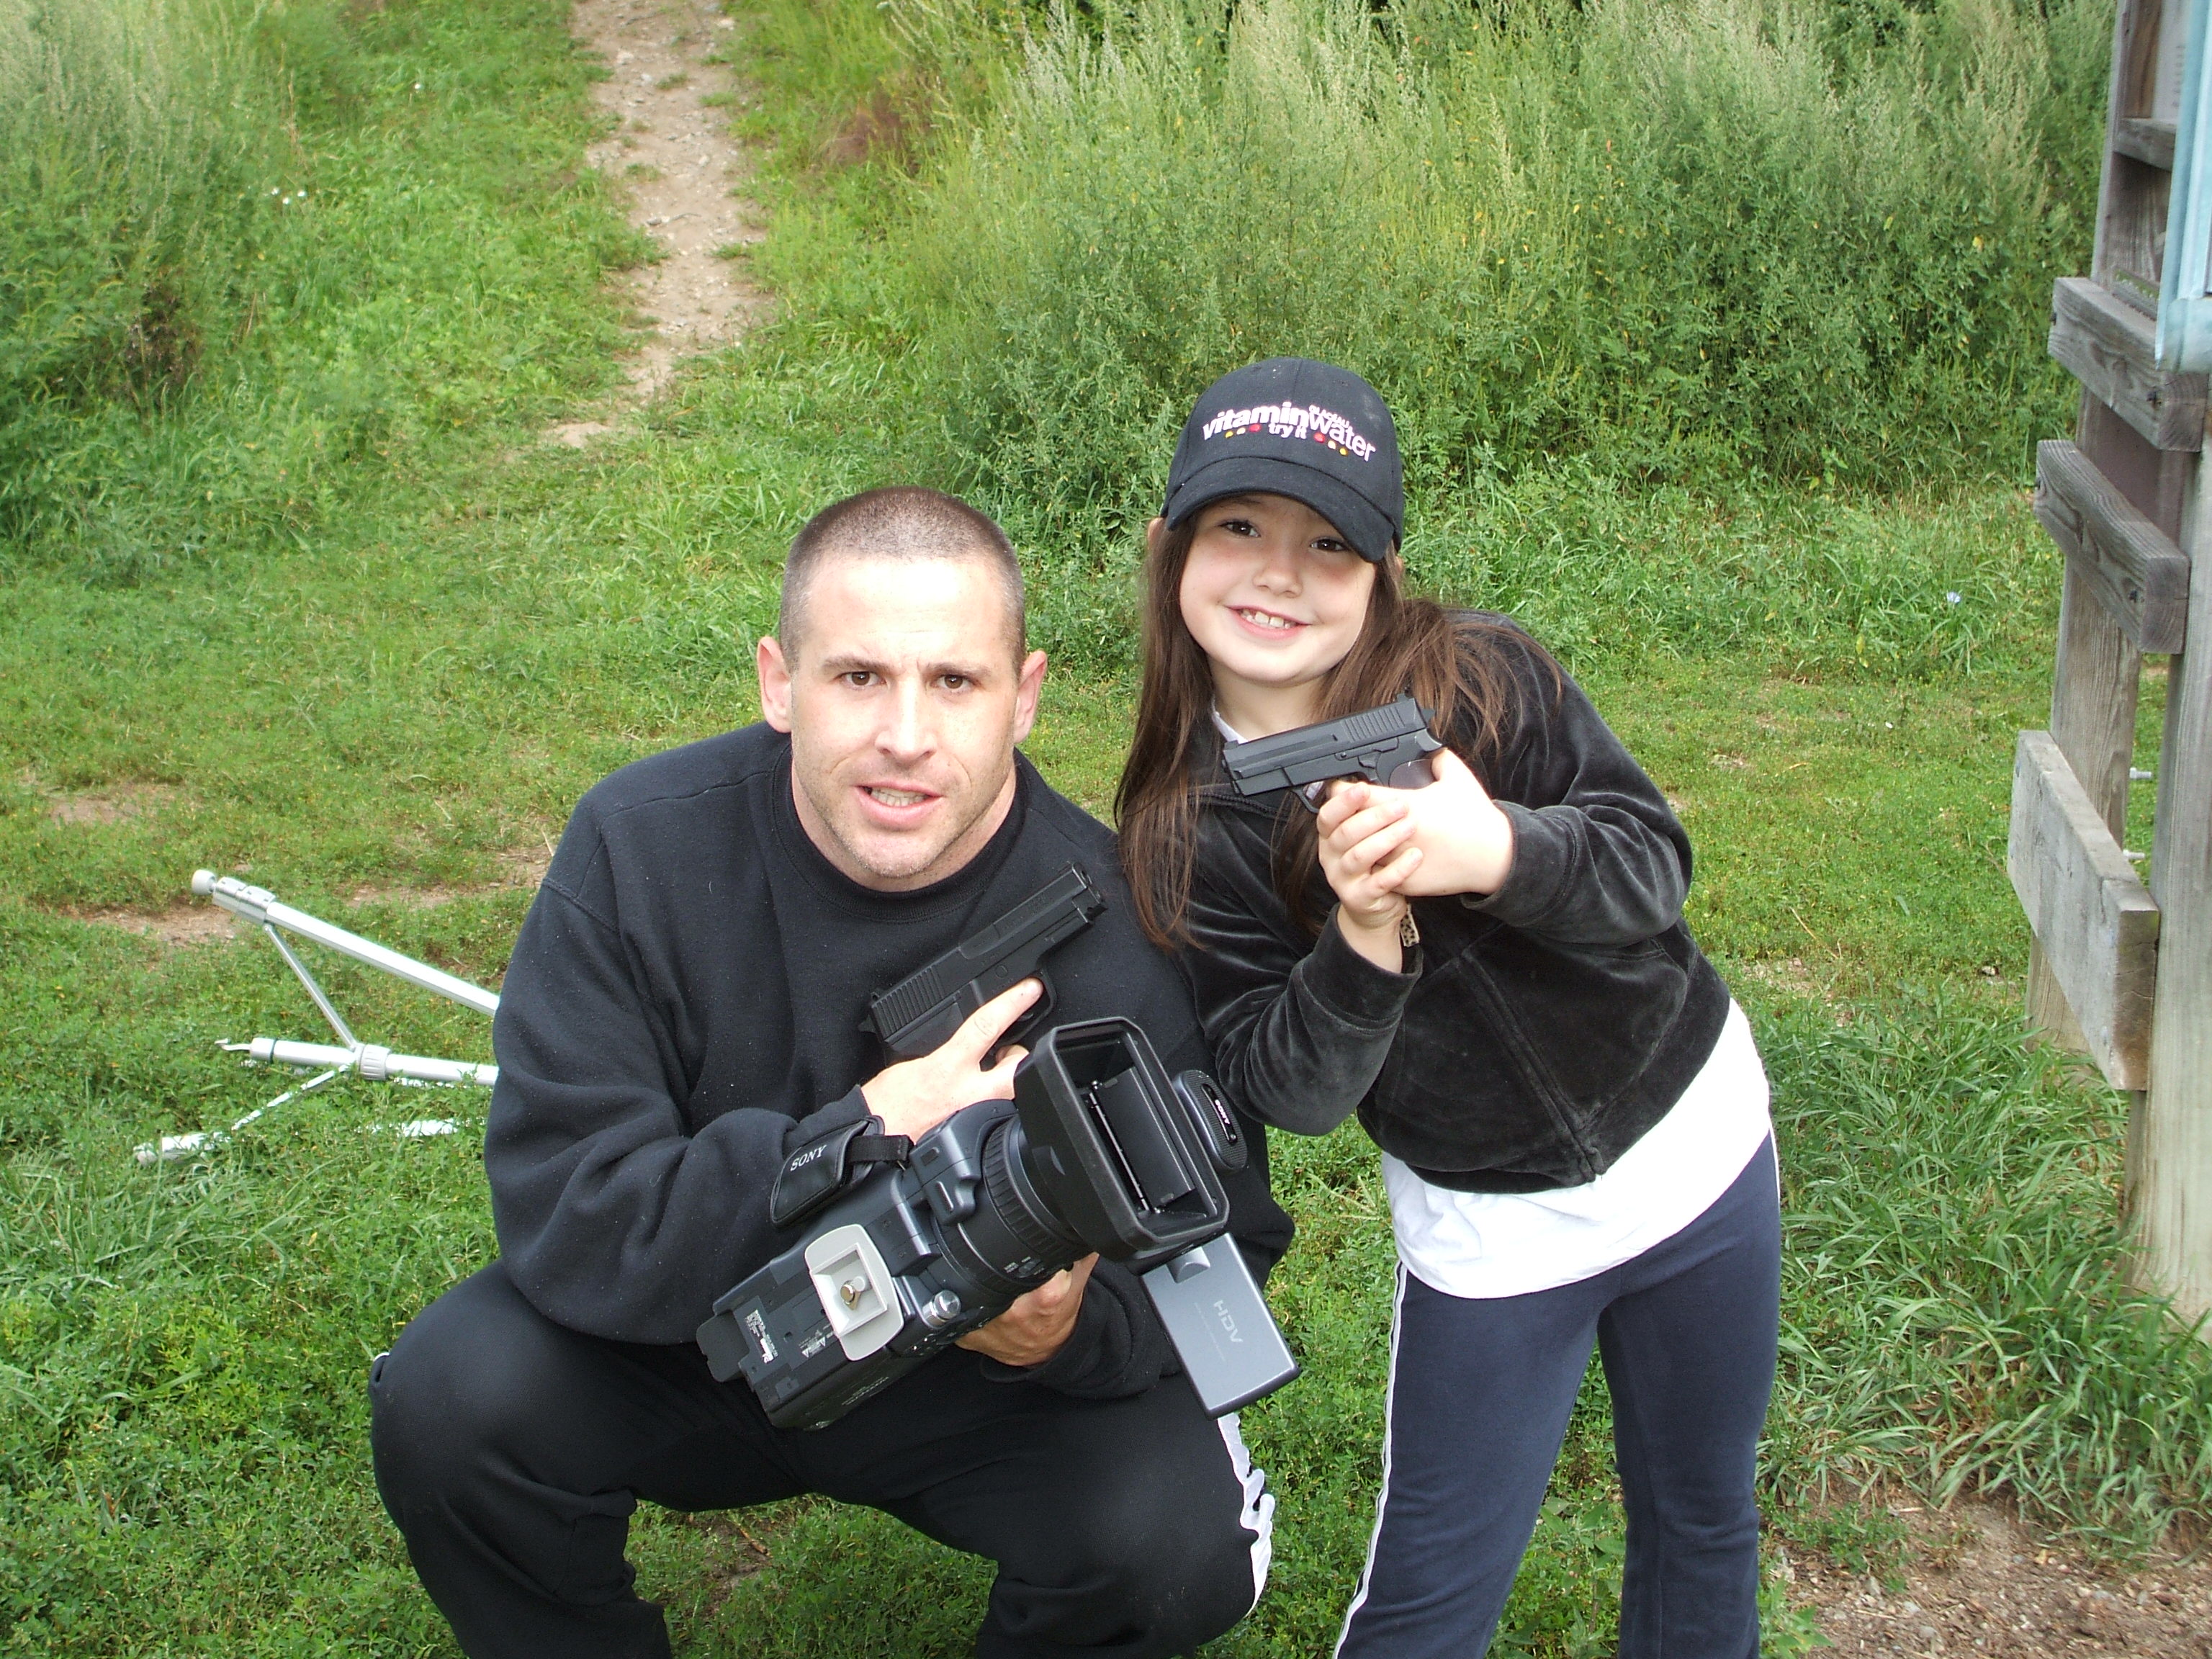 Stephen Cook and Stephanie Ciampa during the filming of Aim Point Shoot (2013)